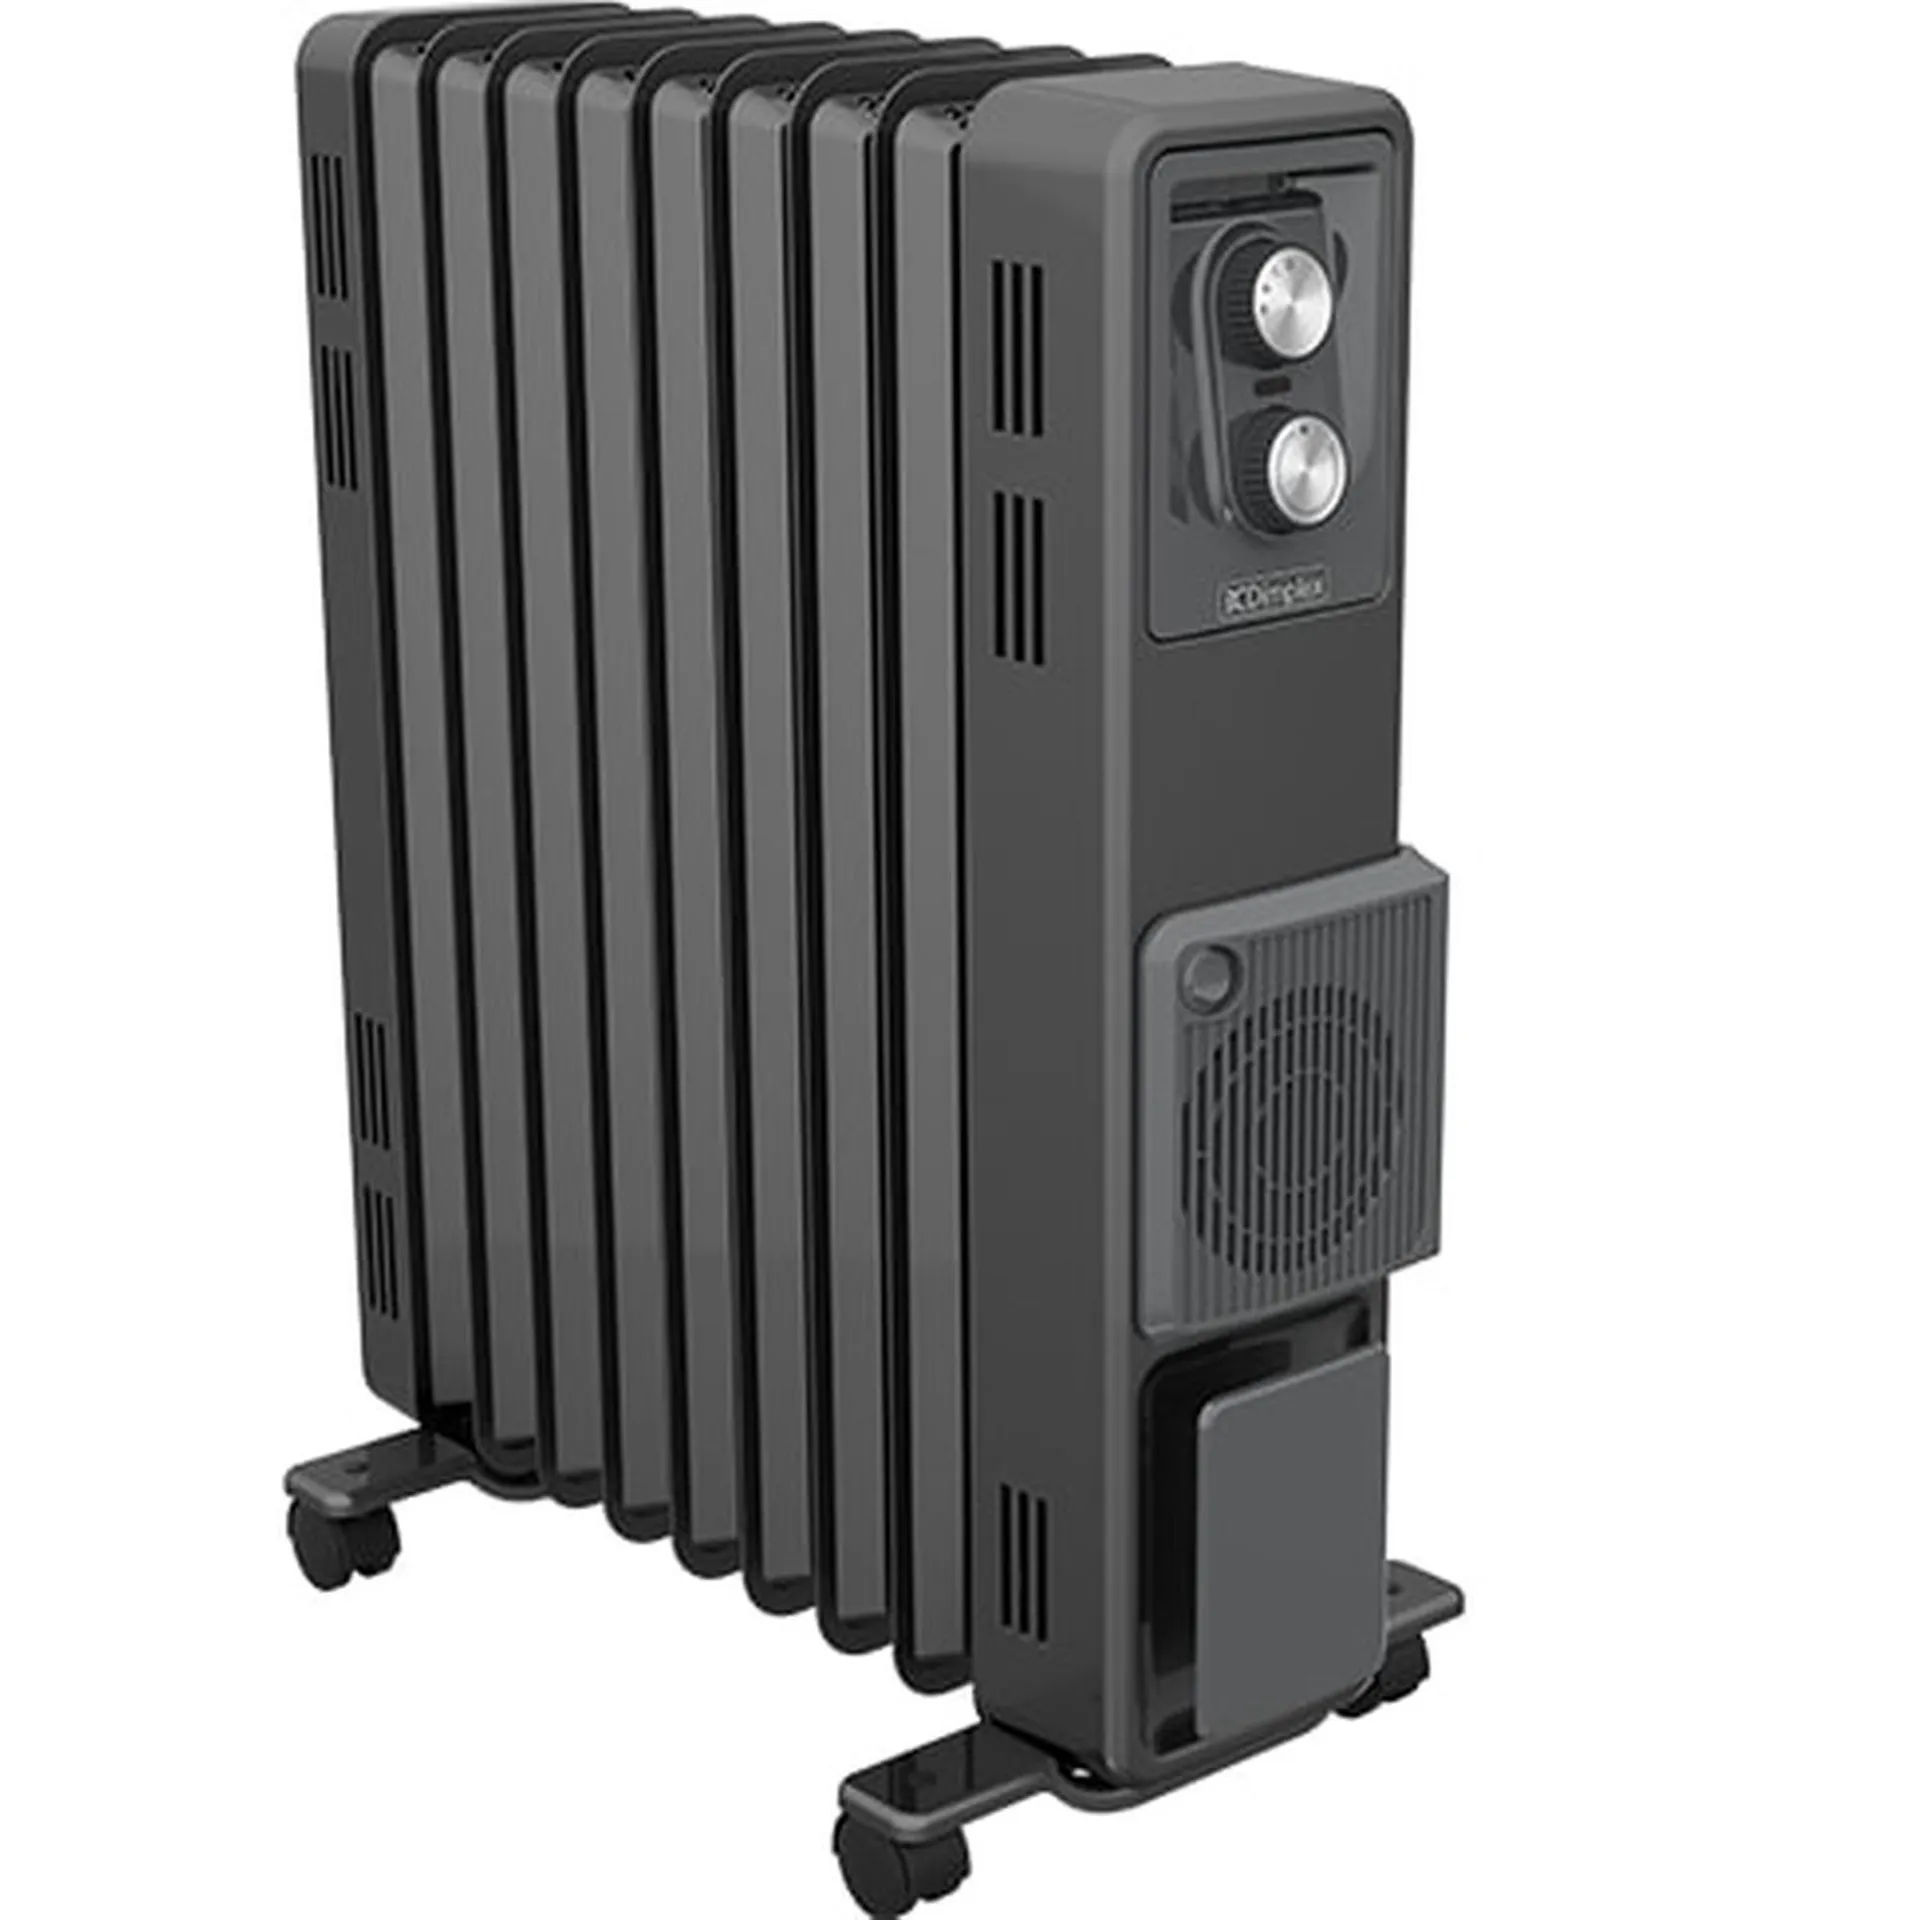 Oil Free Column Heater with Thermostat & Turbo Fan 2.4kW